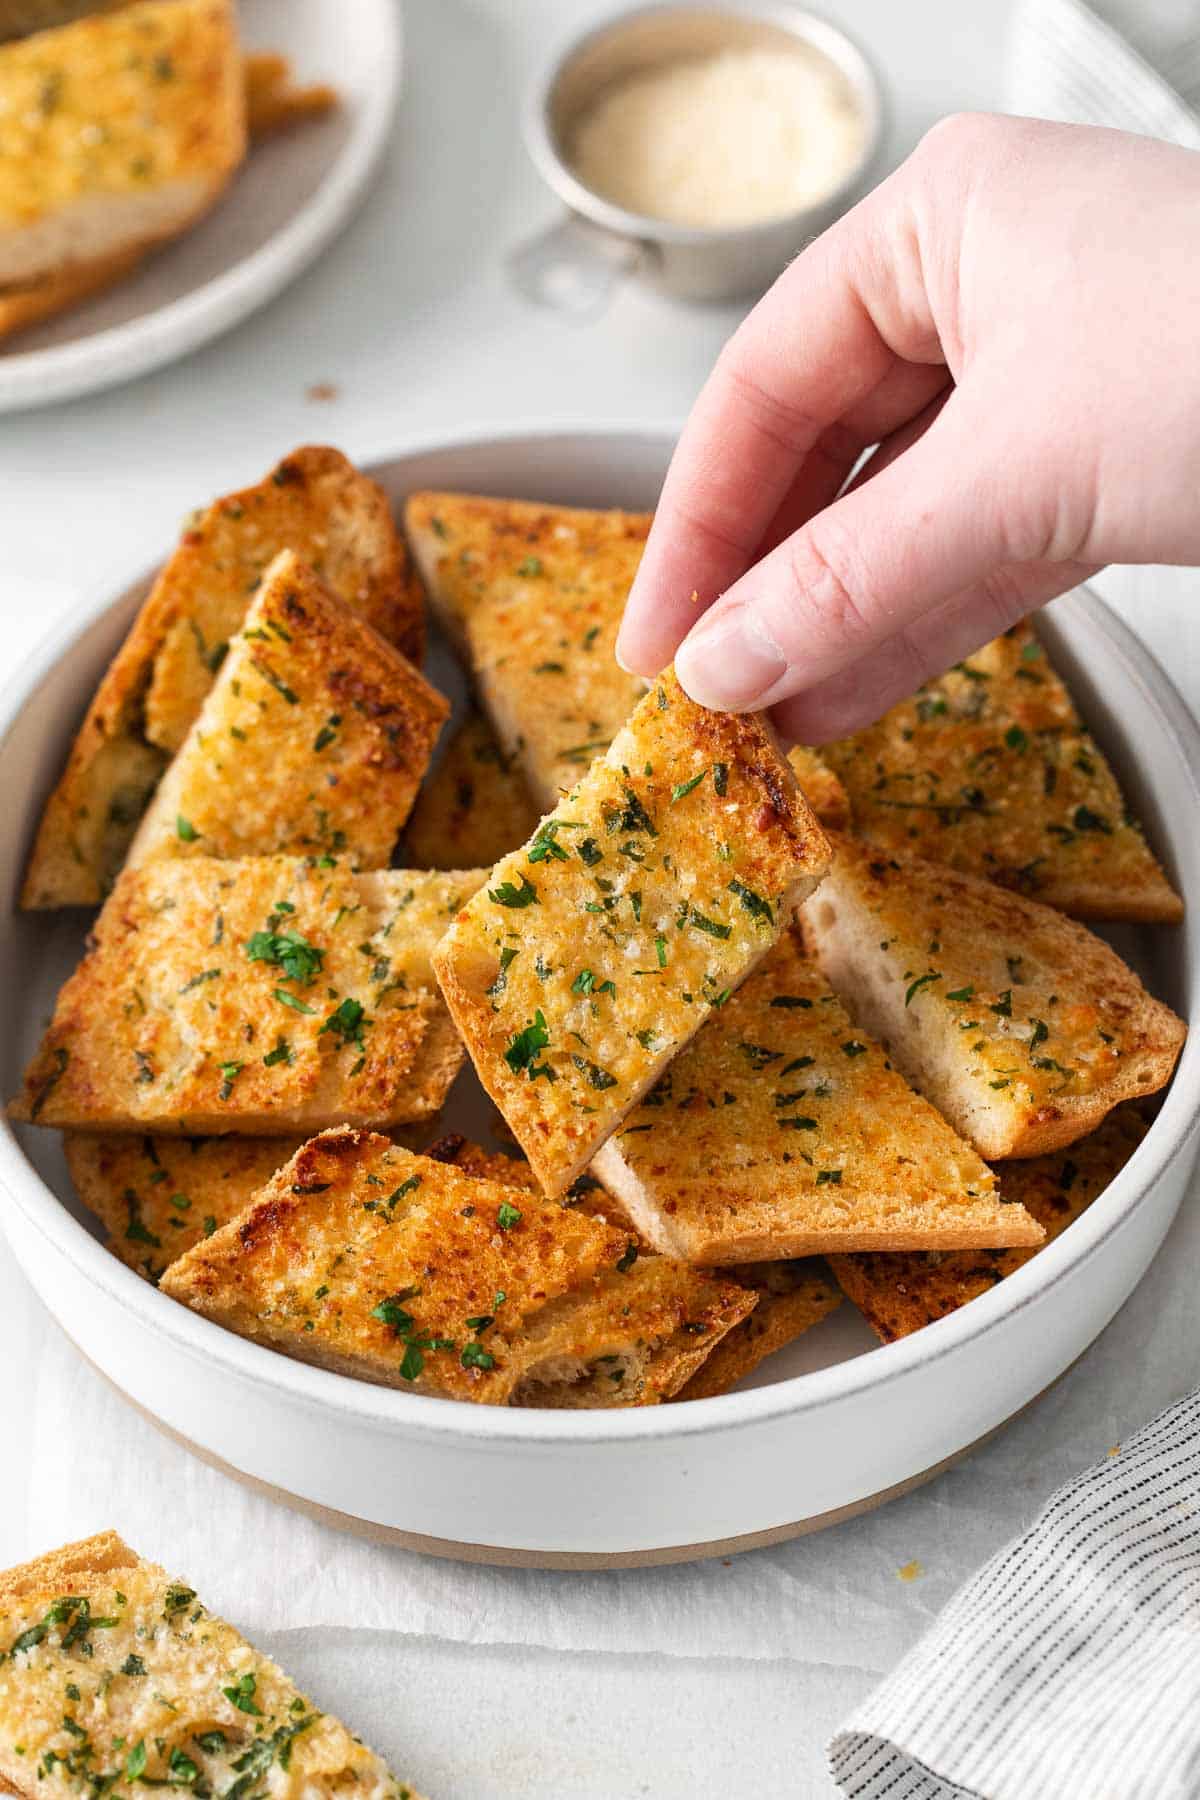 Gluten-free garlic bread sliced in a bowl with a hand picking up a piece